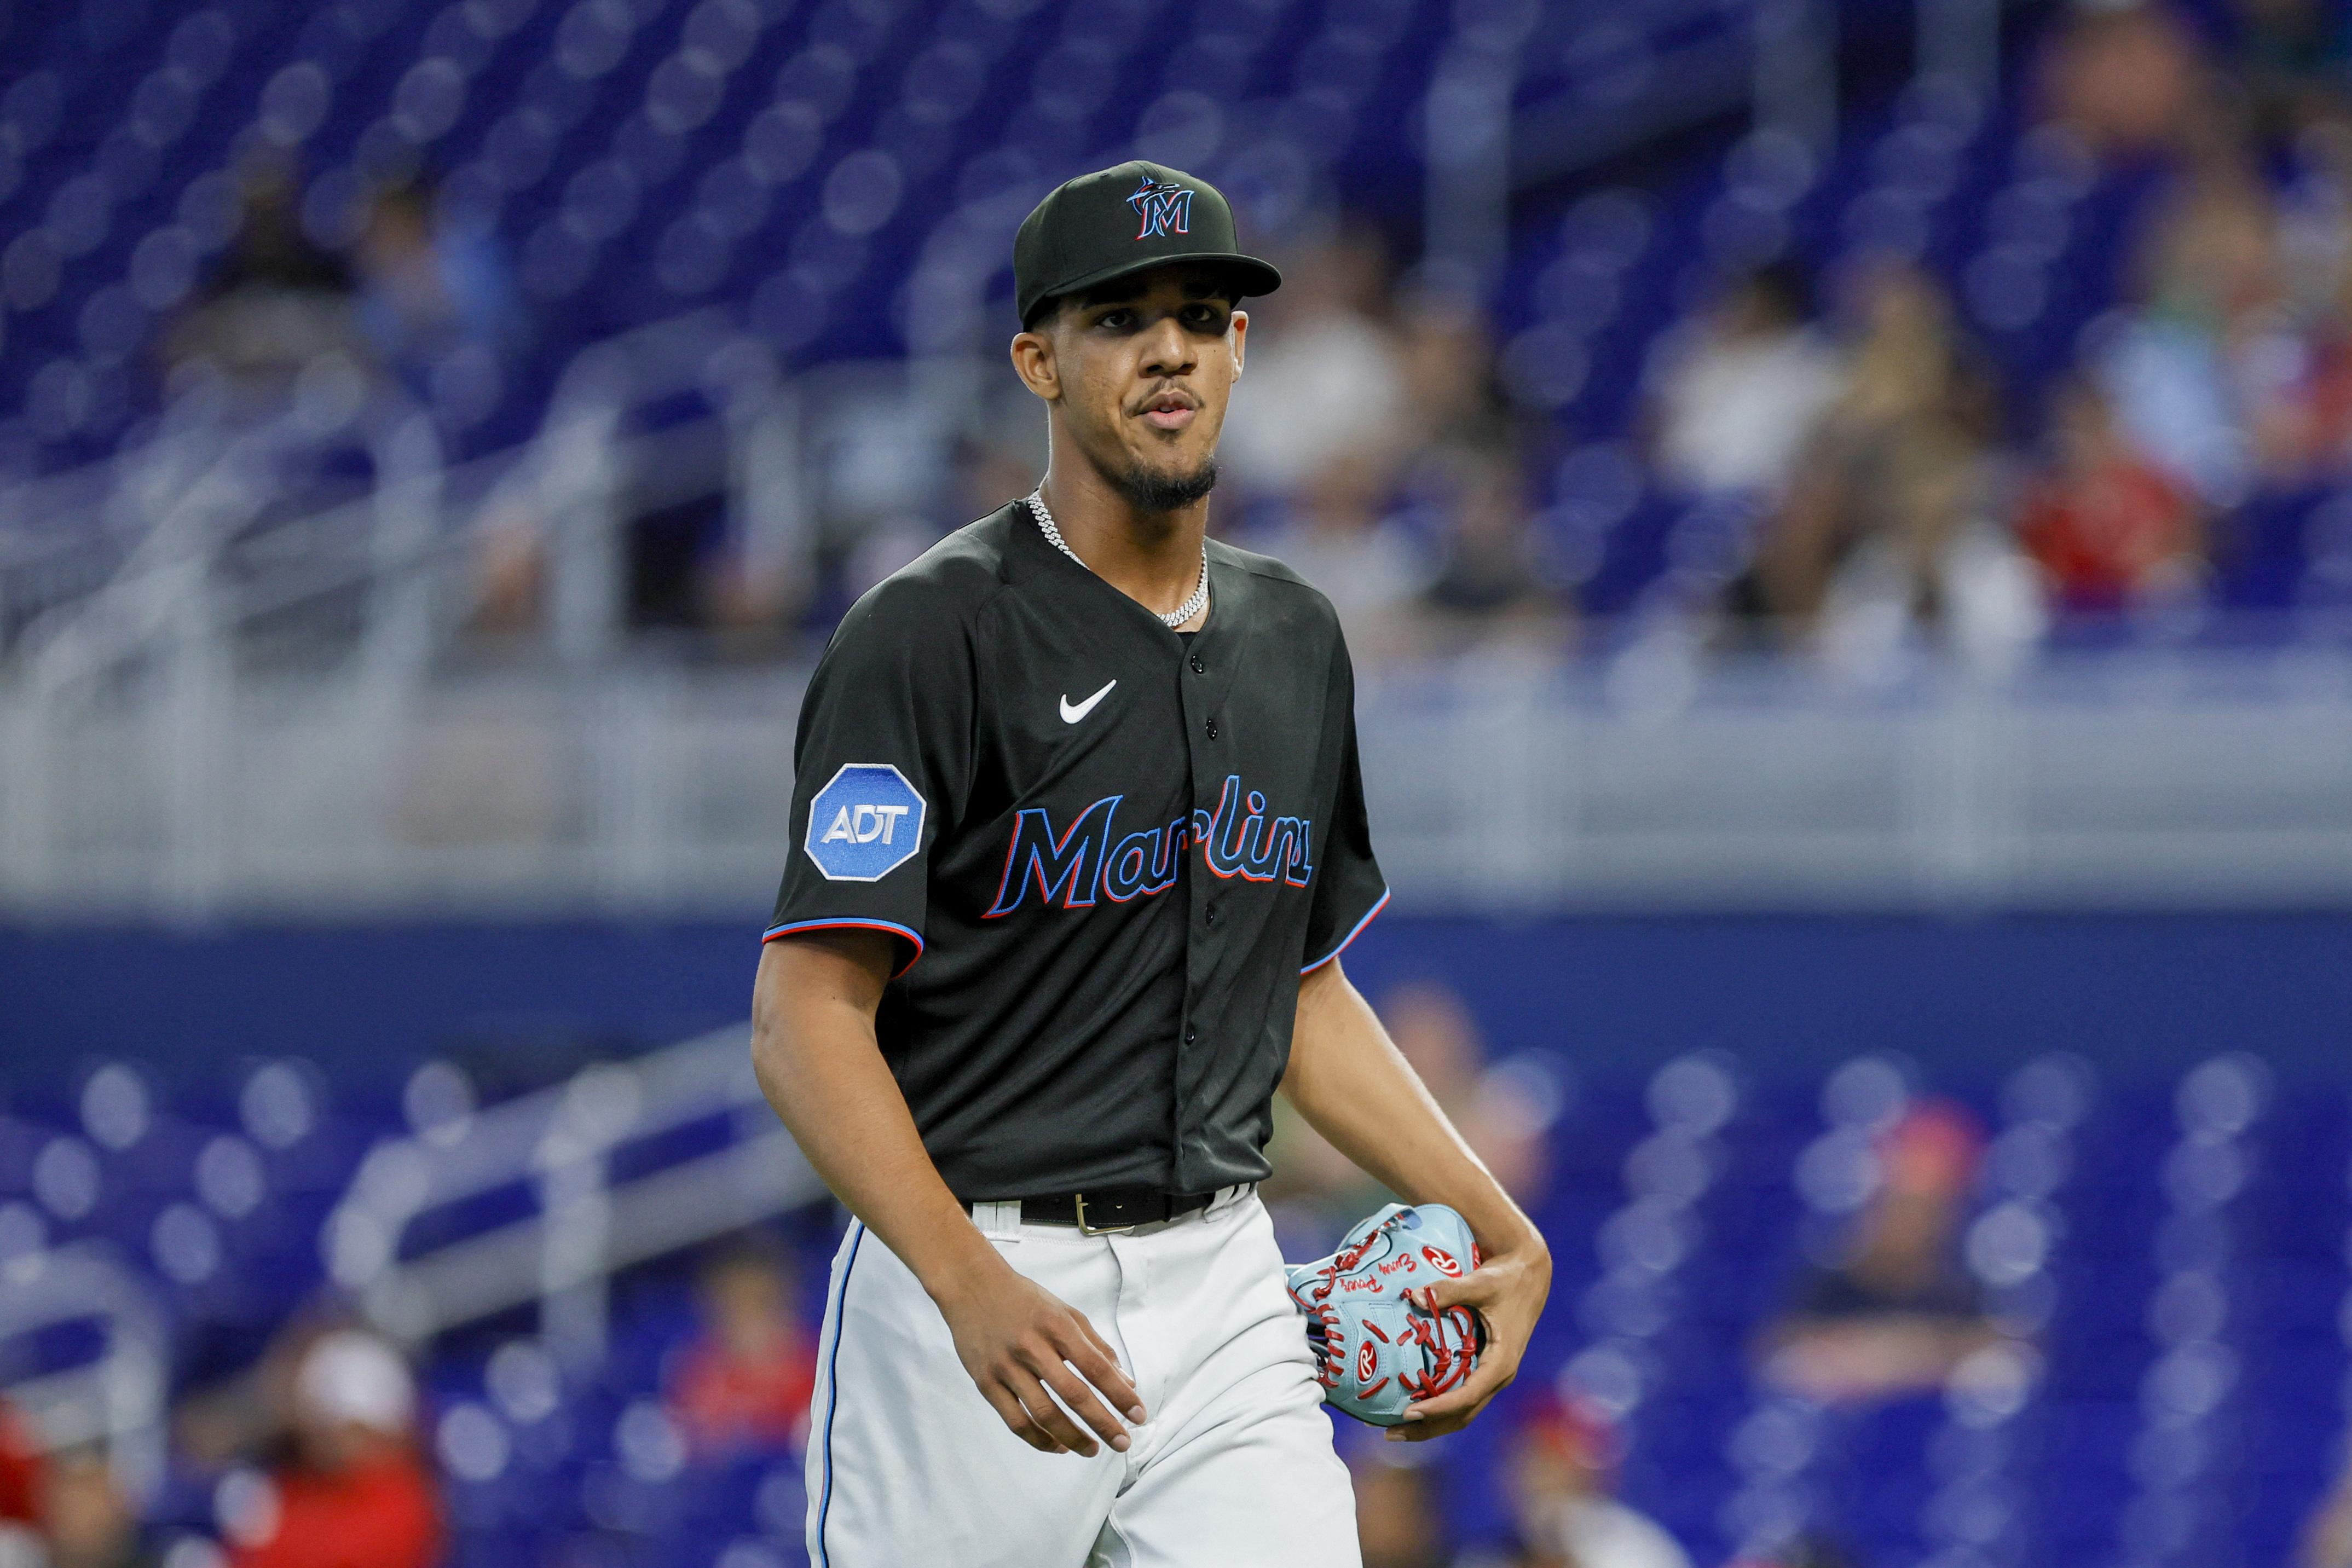 The top 5 Starting Pitcher seasons in Miami Marlins history